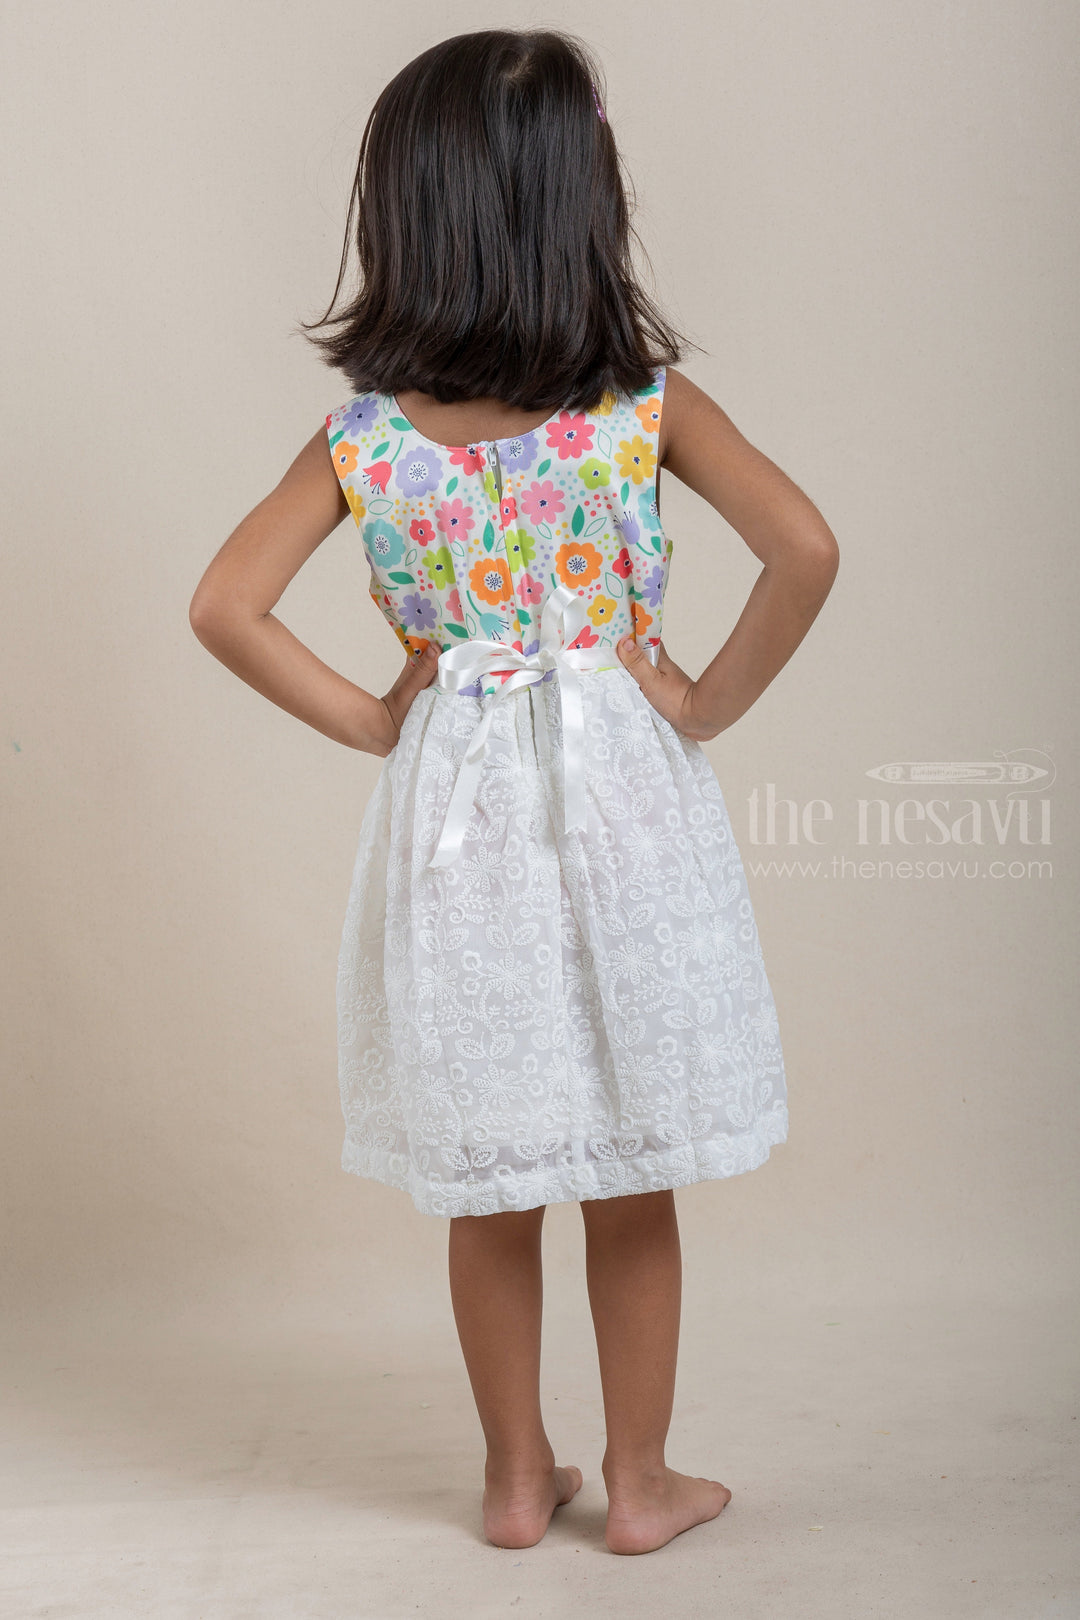 The Nesavu Baby Fancy Frock Floral Printed White Yoke with Floral Designer Lucknow Chikan Baby Frock With Bow Applique Nesavu Baby Cotton Frock Collection | New Arrivals | The Nesavu